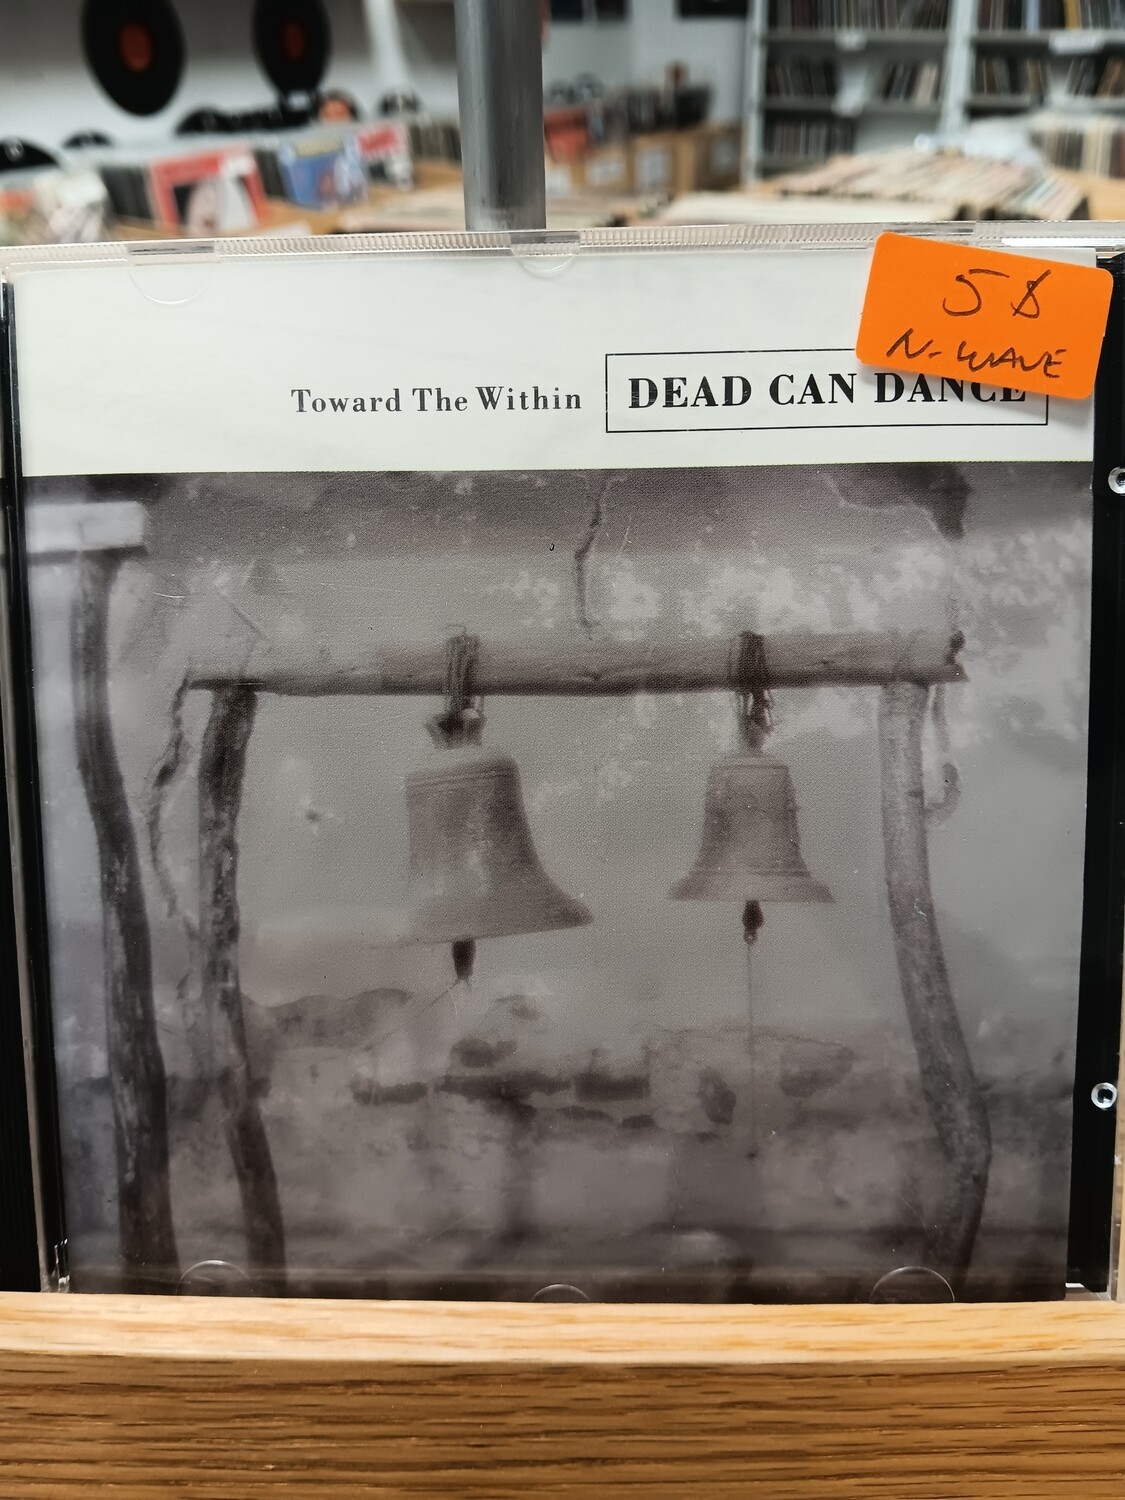 DEAD CAN DANCE - Toward the within (CD)